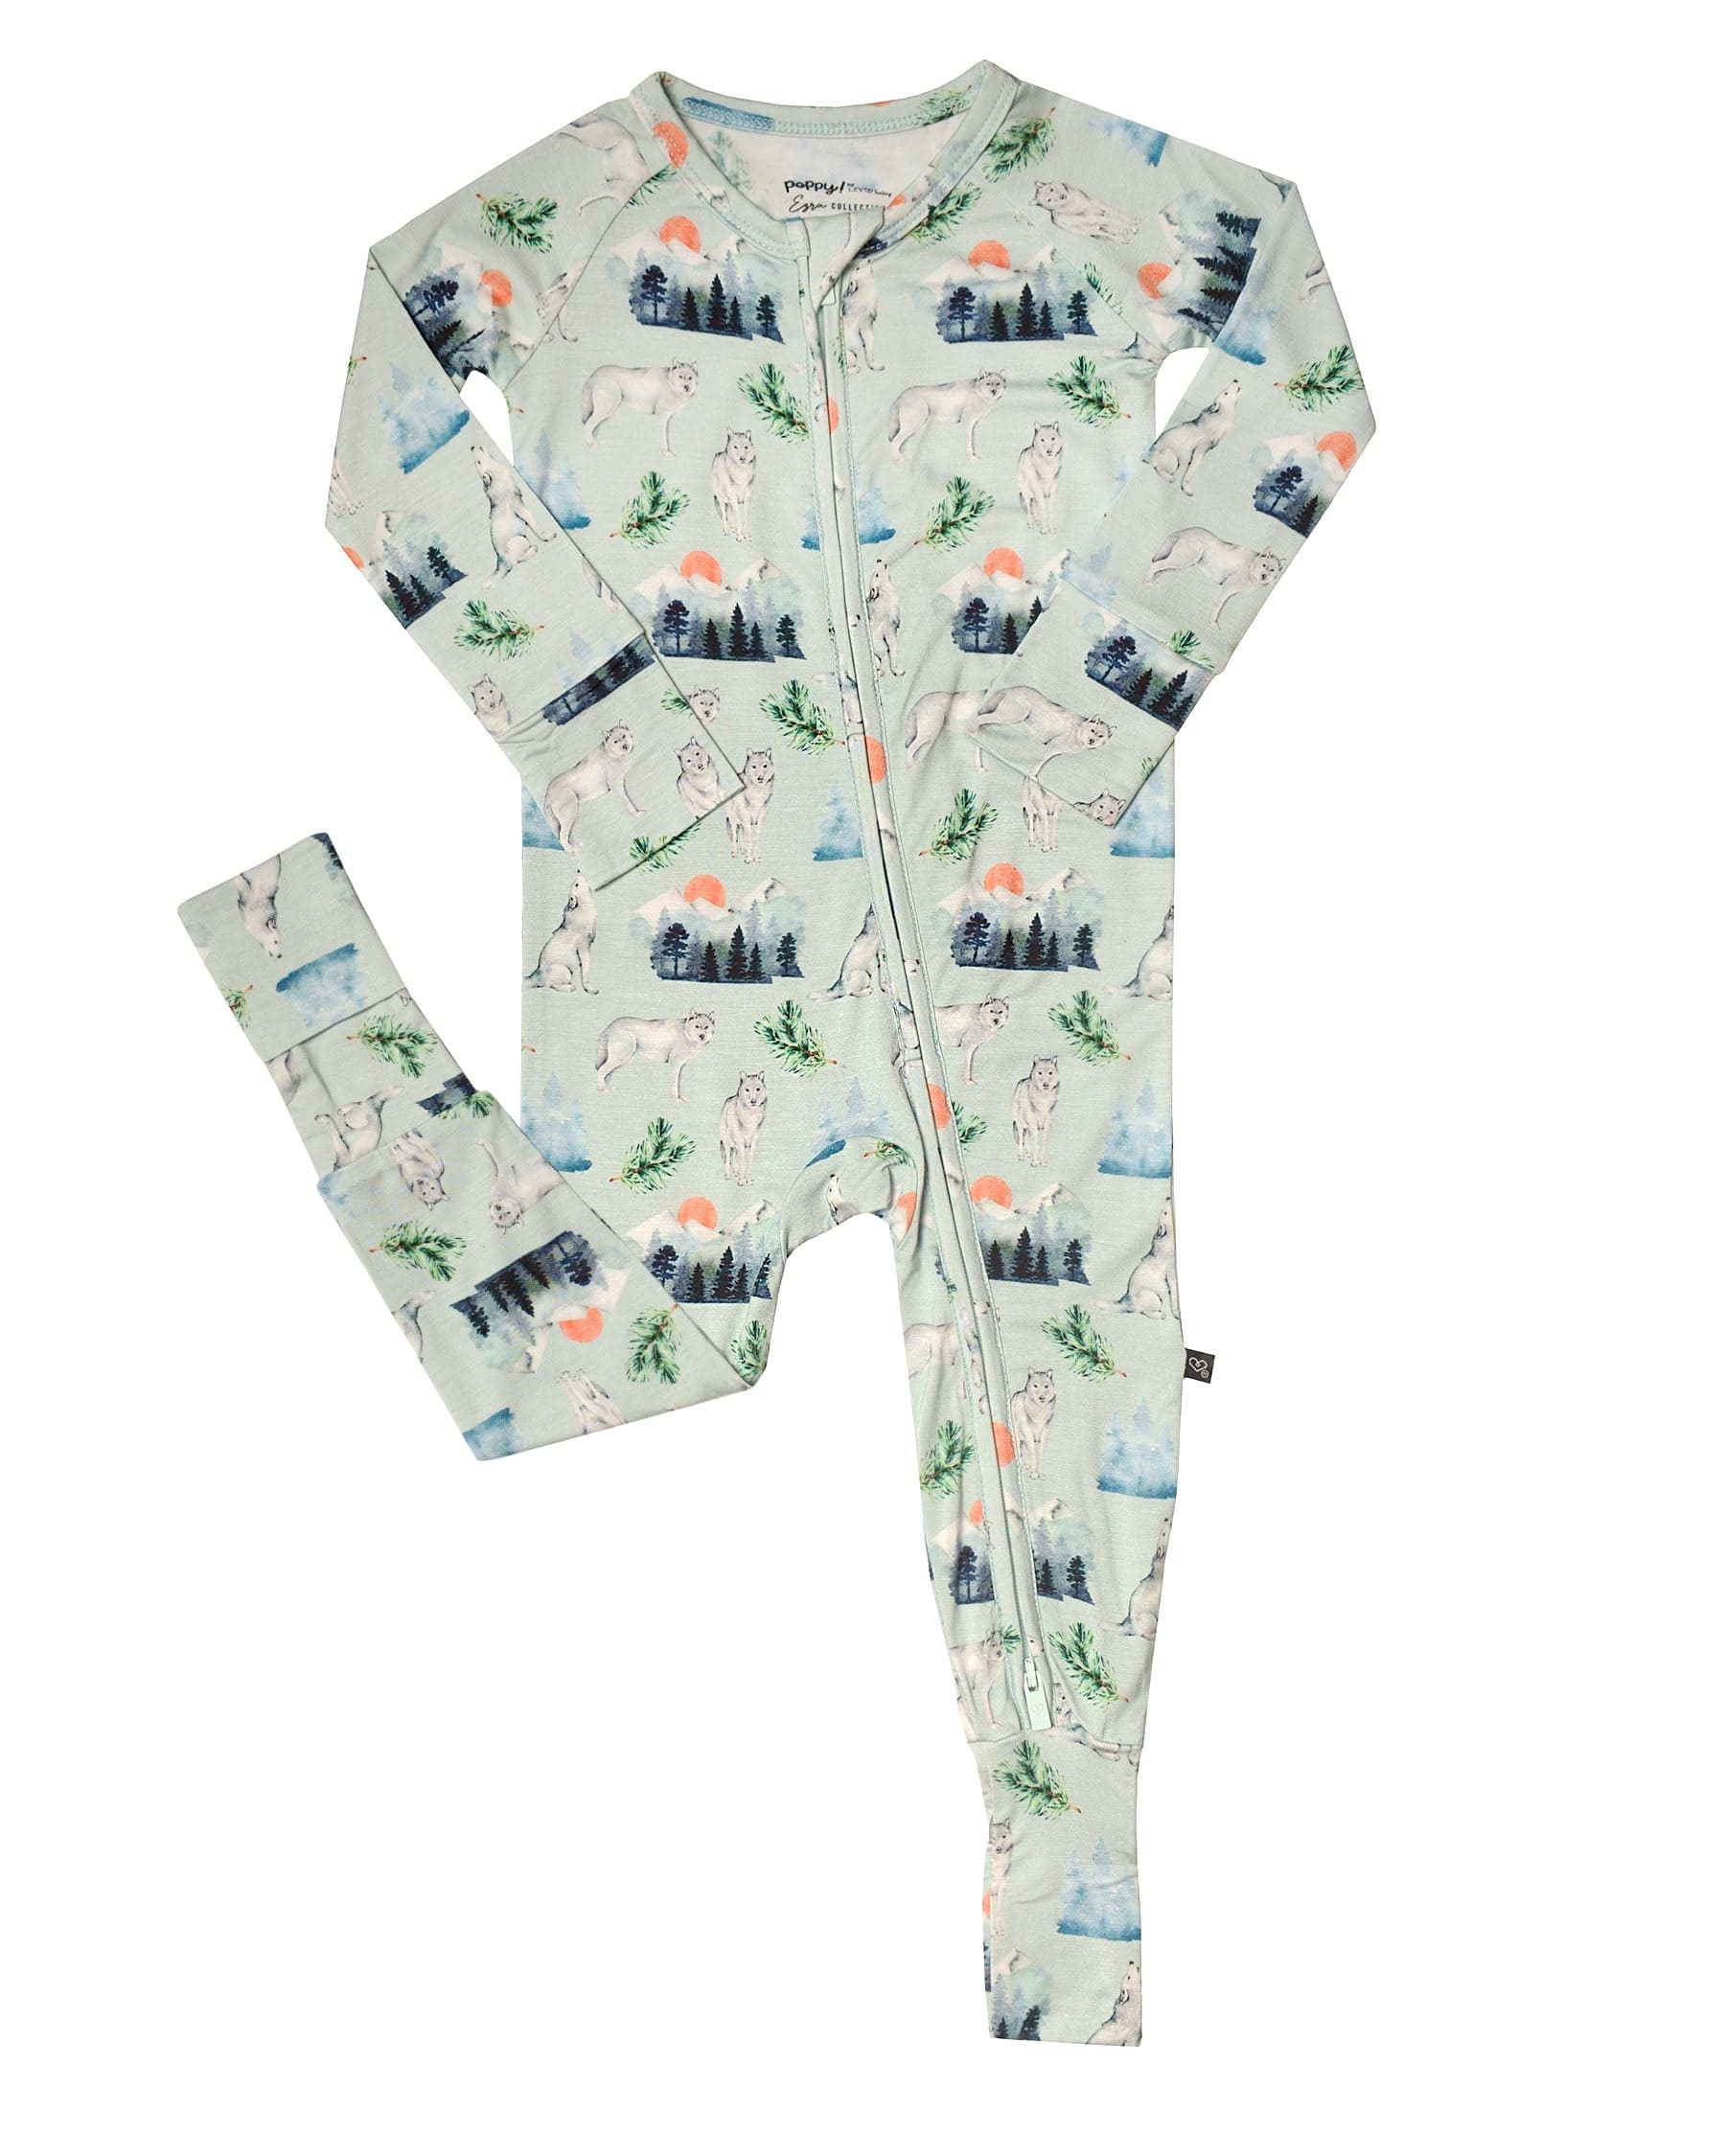 Mountains ‘Poppy’™: The Convertible Romper